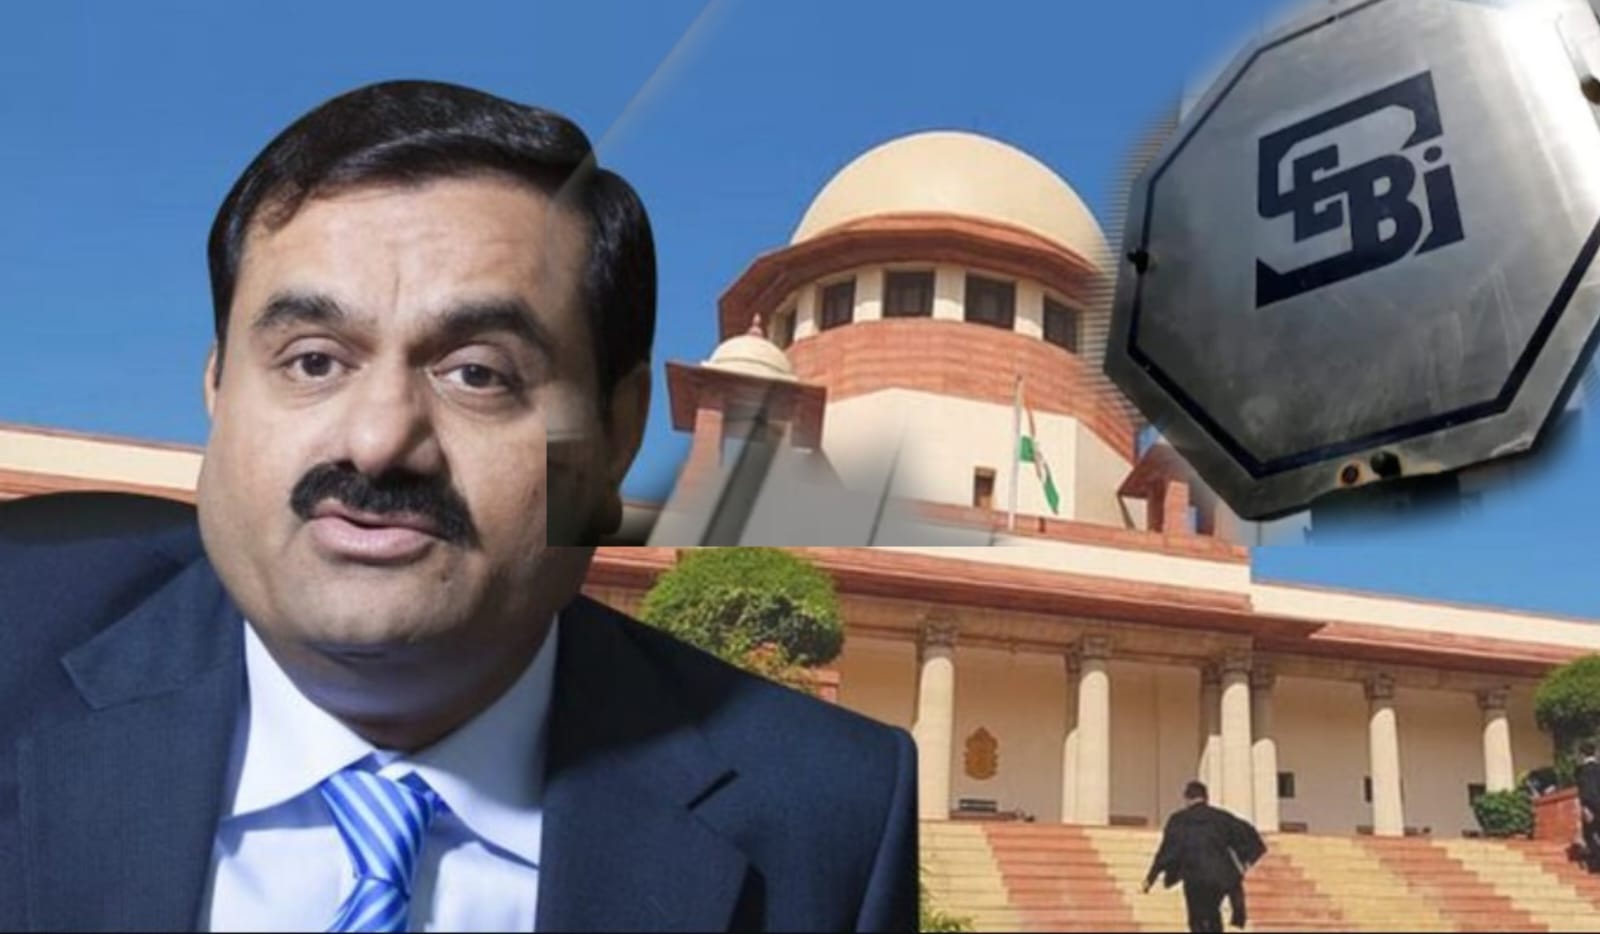 Adani-Hindenburg row: SC directs SEBI to conclude probe in 2 months and submit status report in sealed envelope before the court